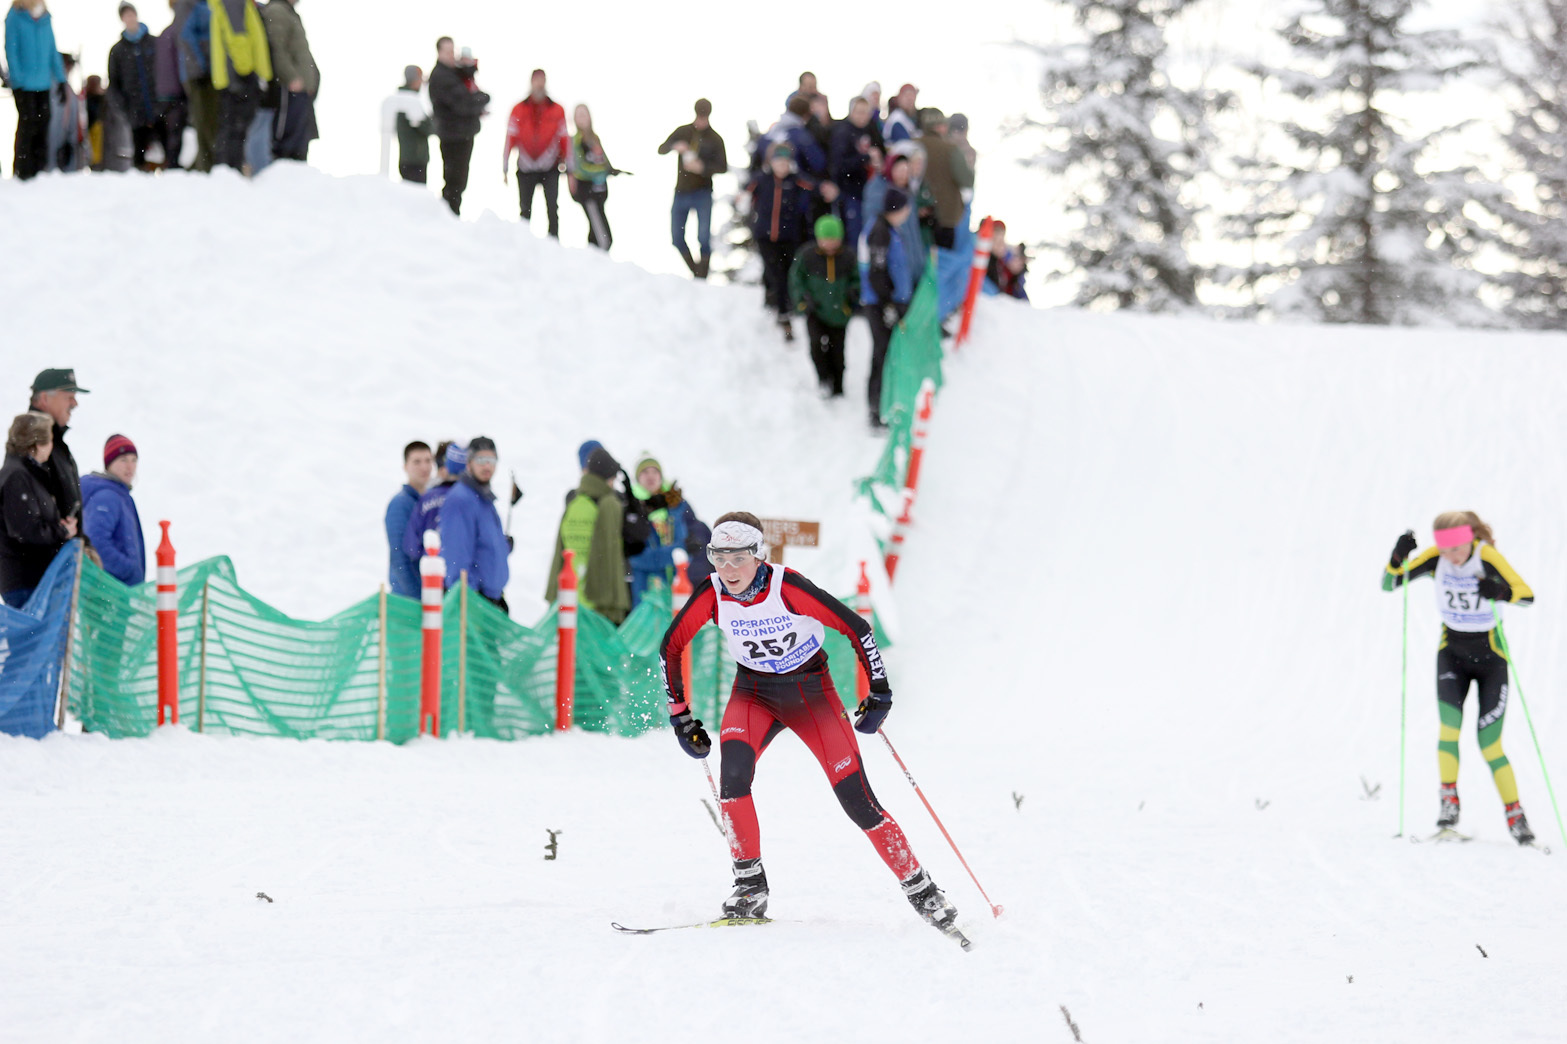 Kenai Central’s Riana Boonstra leads Seward’s Ruby Lindquist on Saturday at the Region III ski meet at Government Peak. (Photo by Caitlin Skvorc/For the Frontiersman)